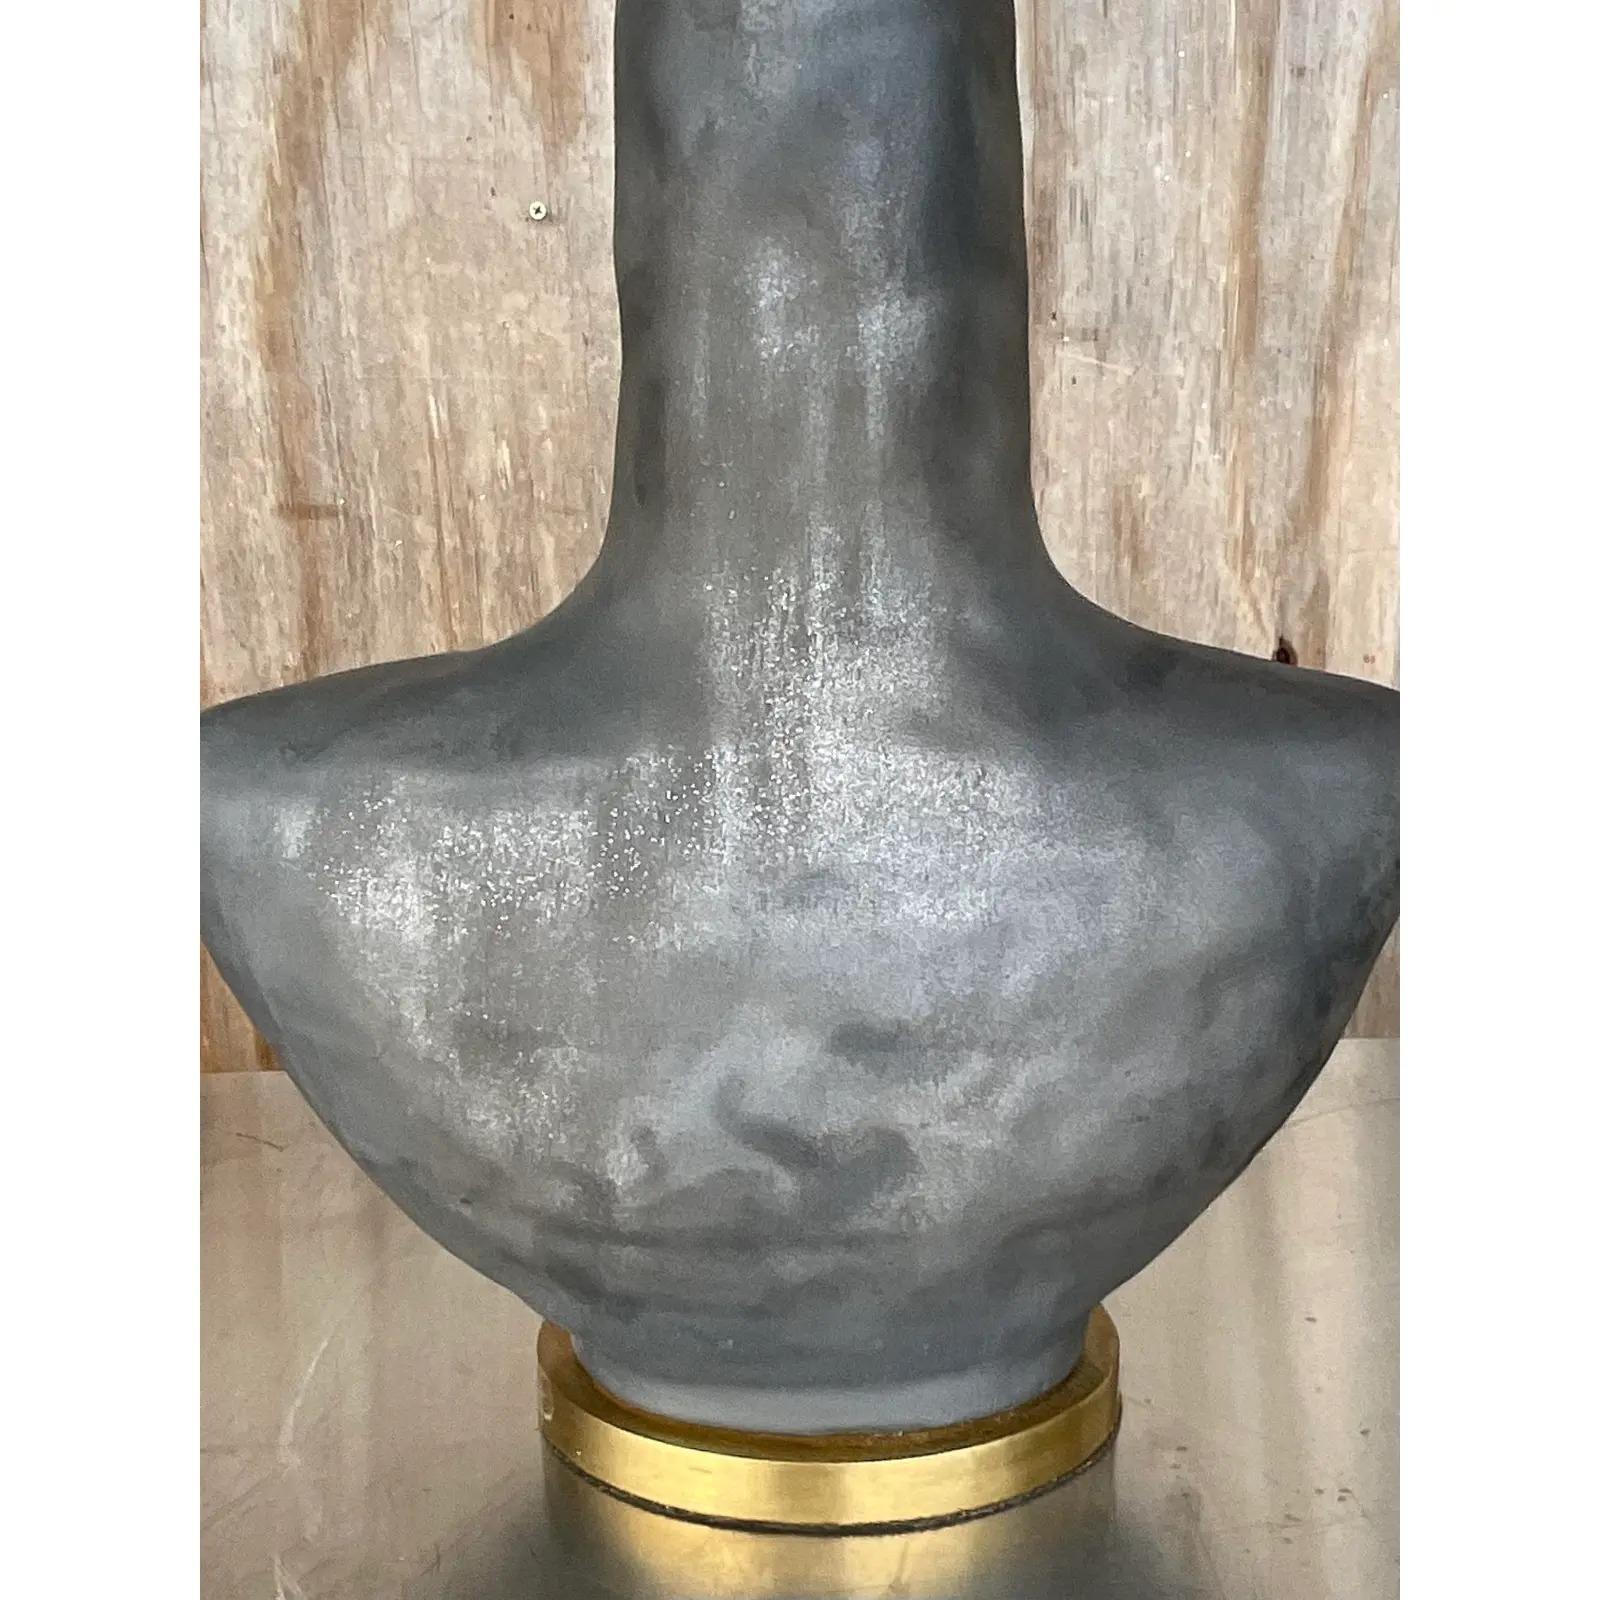 Incredible pair of vintage table lamps. Made by the iconic Kelly Wearstler for Visual Comfort. The beautiful Armato design with a torched finish and brushed brass hardware. Marked on the plinth and the socket. Acquired from a Palm Beach estate.